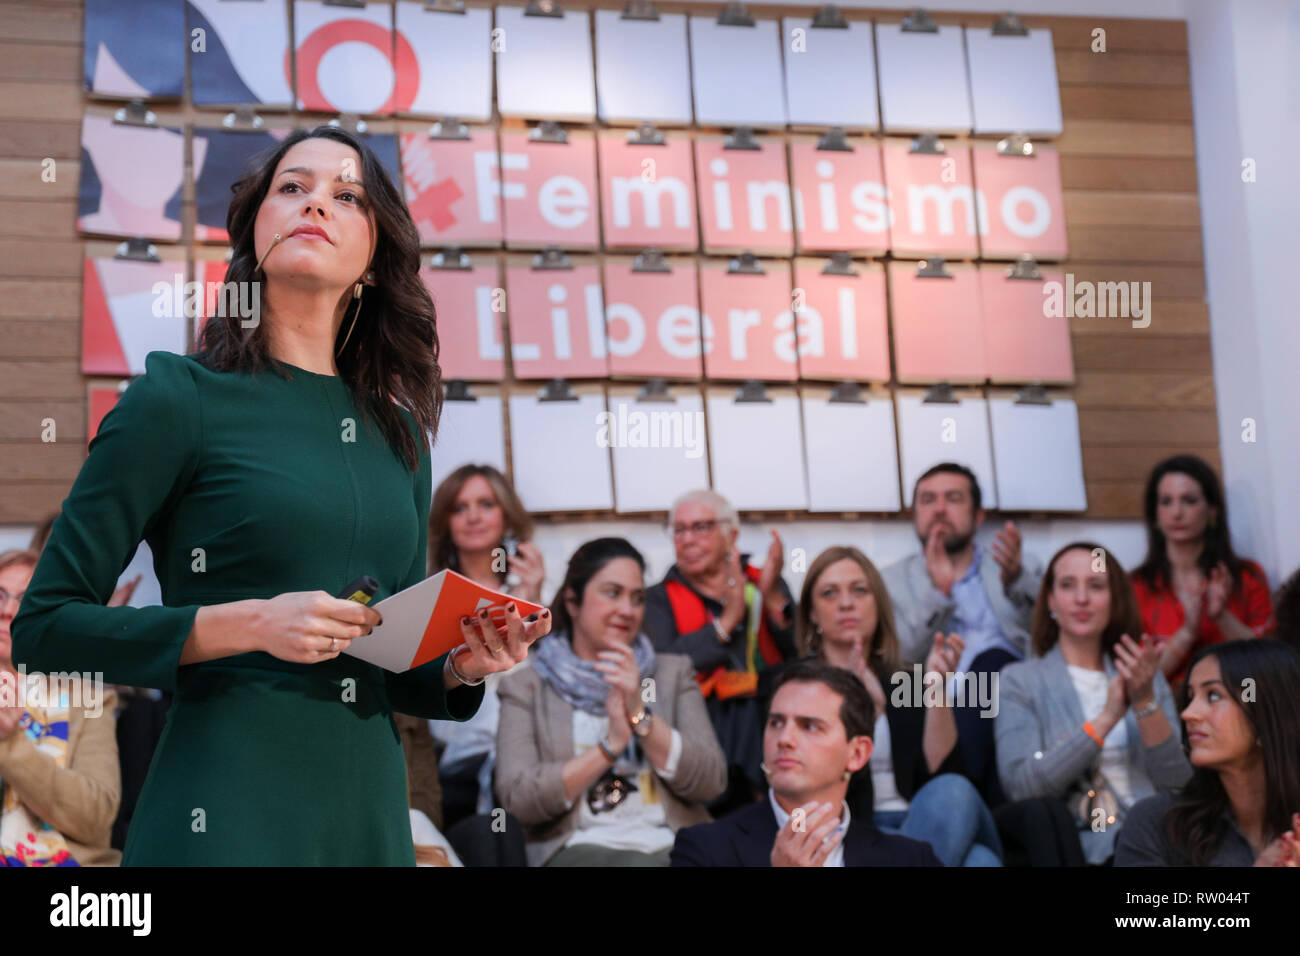 National party spokesperson, Inés Arrimadas seen speaking about of the Decalogue of Ciudadanos during the event. Stock Photo